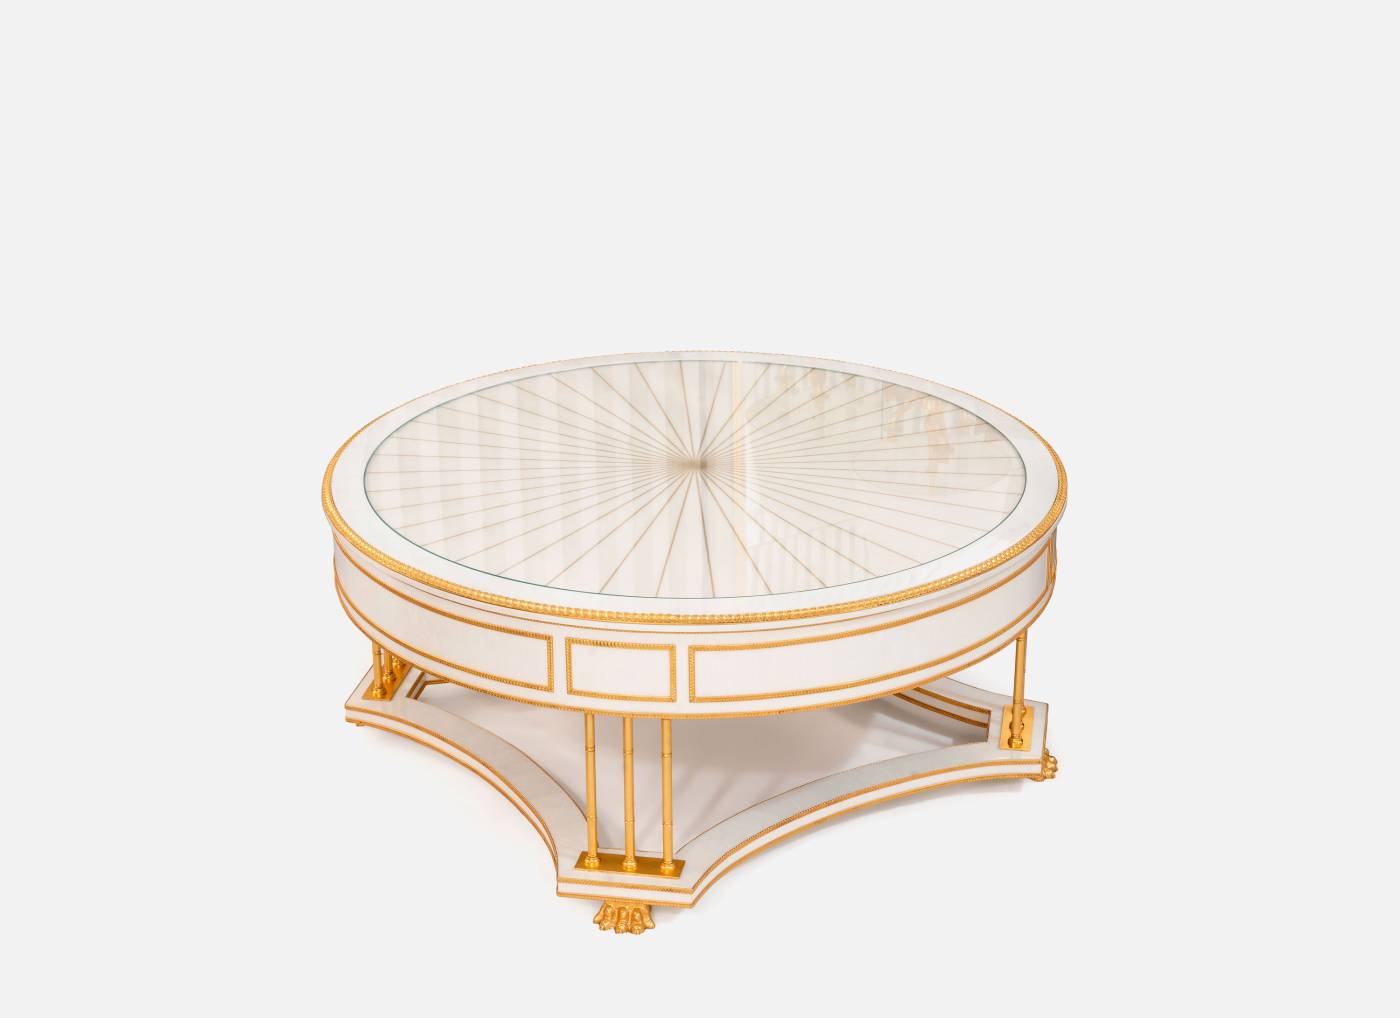 ART. 922-22 – Discover the elegance of luxury classic Small tables made in Italy by C.G. Capelletti. Luxury classic furniture that combines style and craftsmanship.